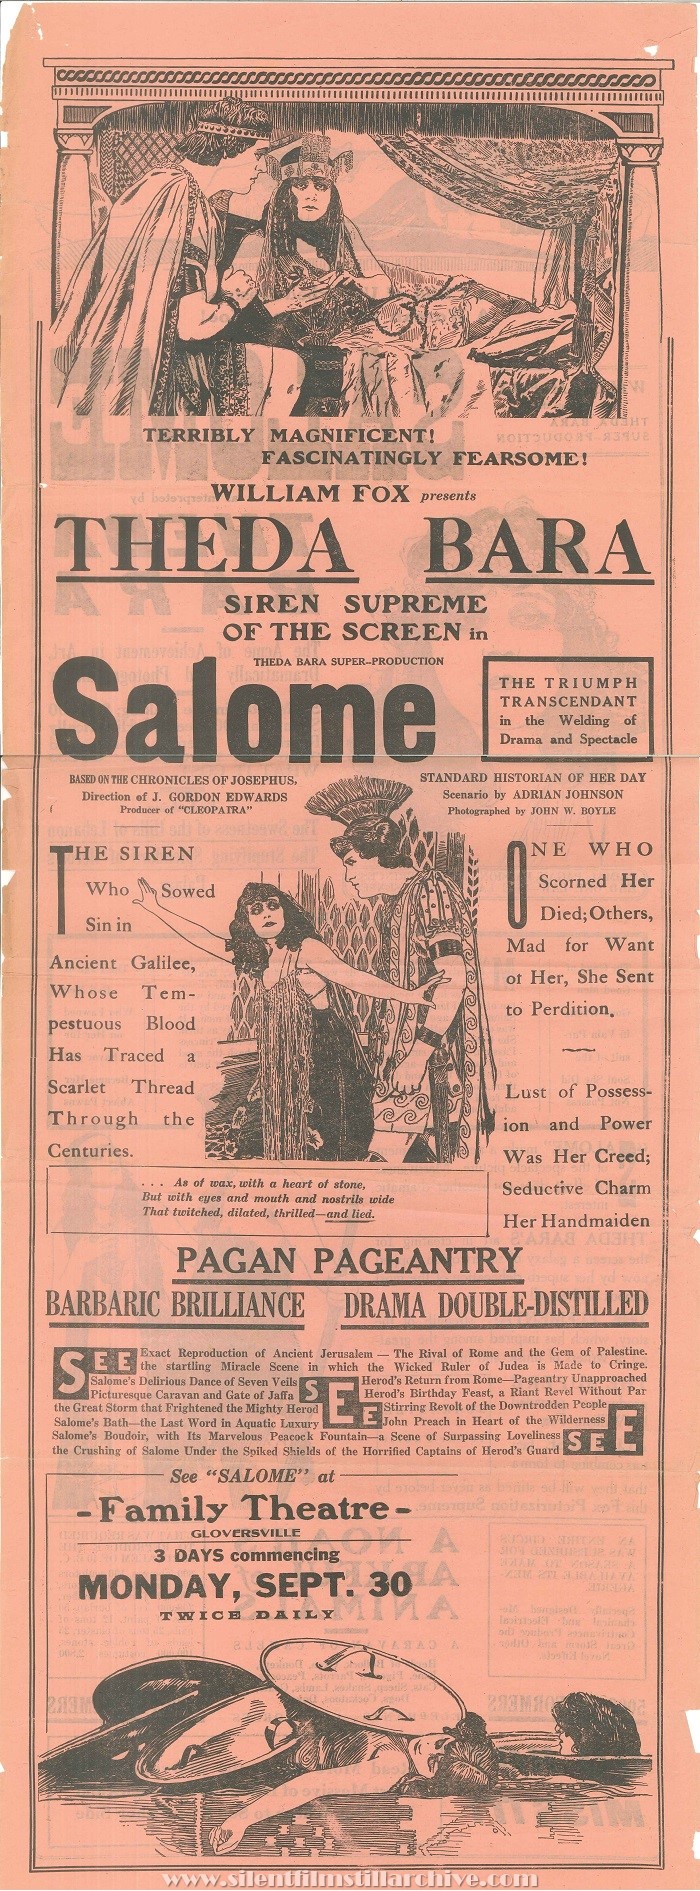 Large herald/broadside for SALOME (1918) starring Theda Bara, screening at the Family Theatre in Gloversville